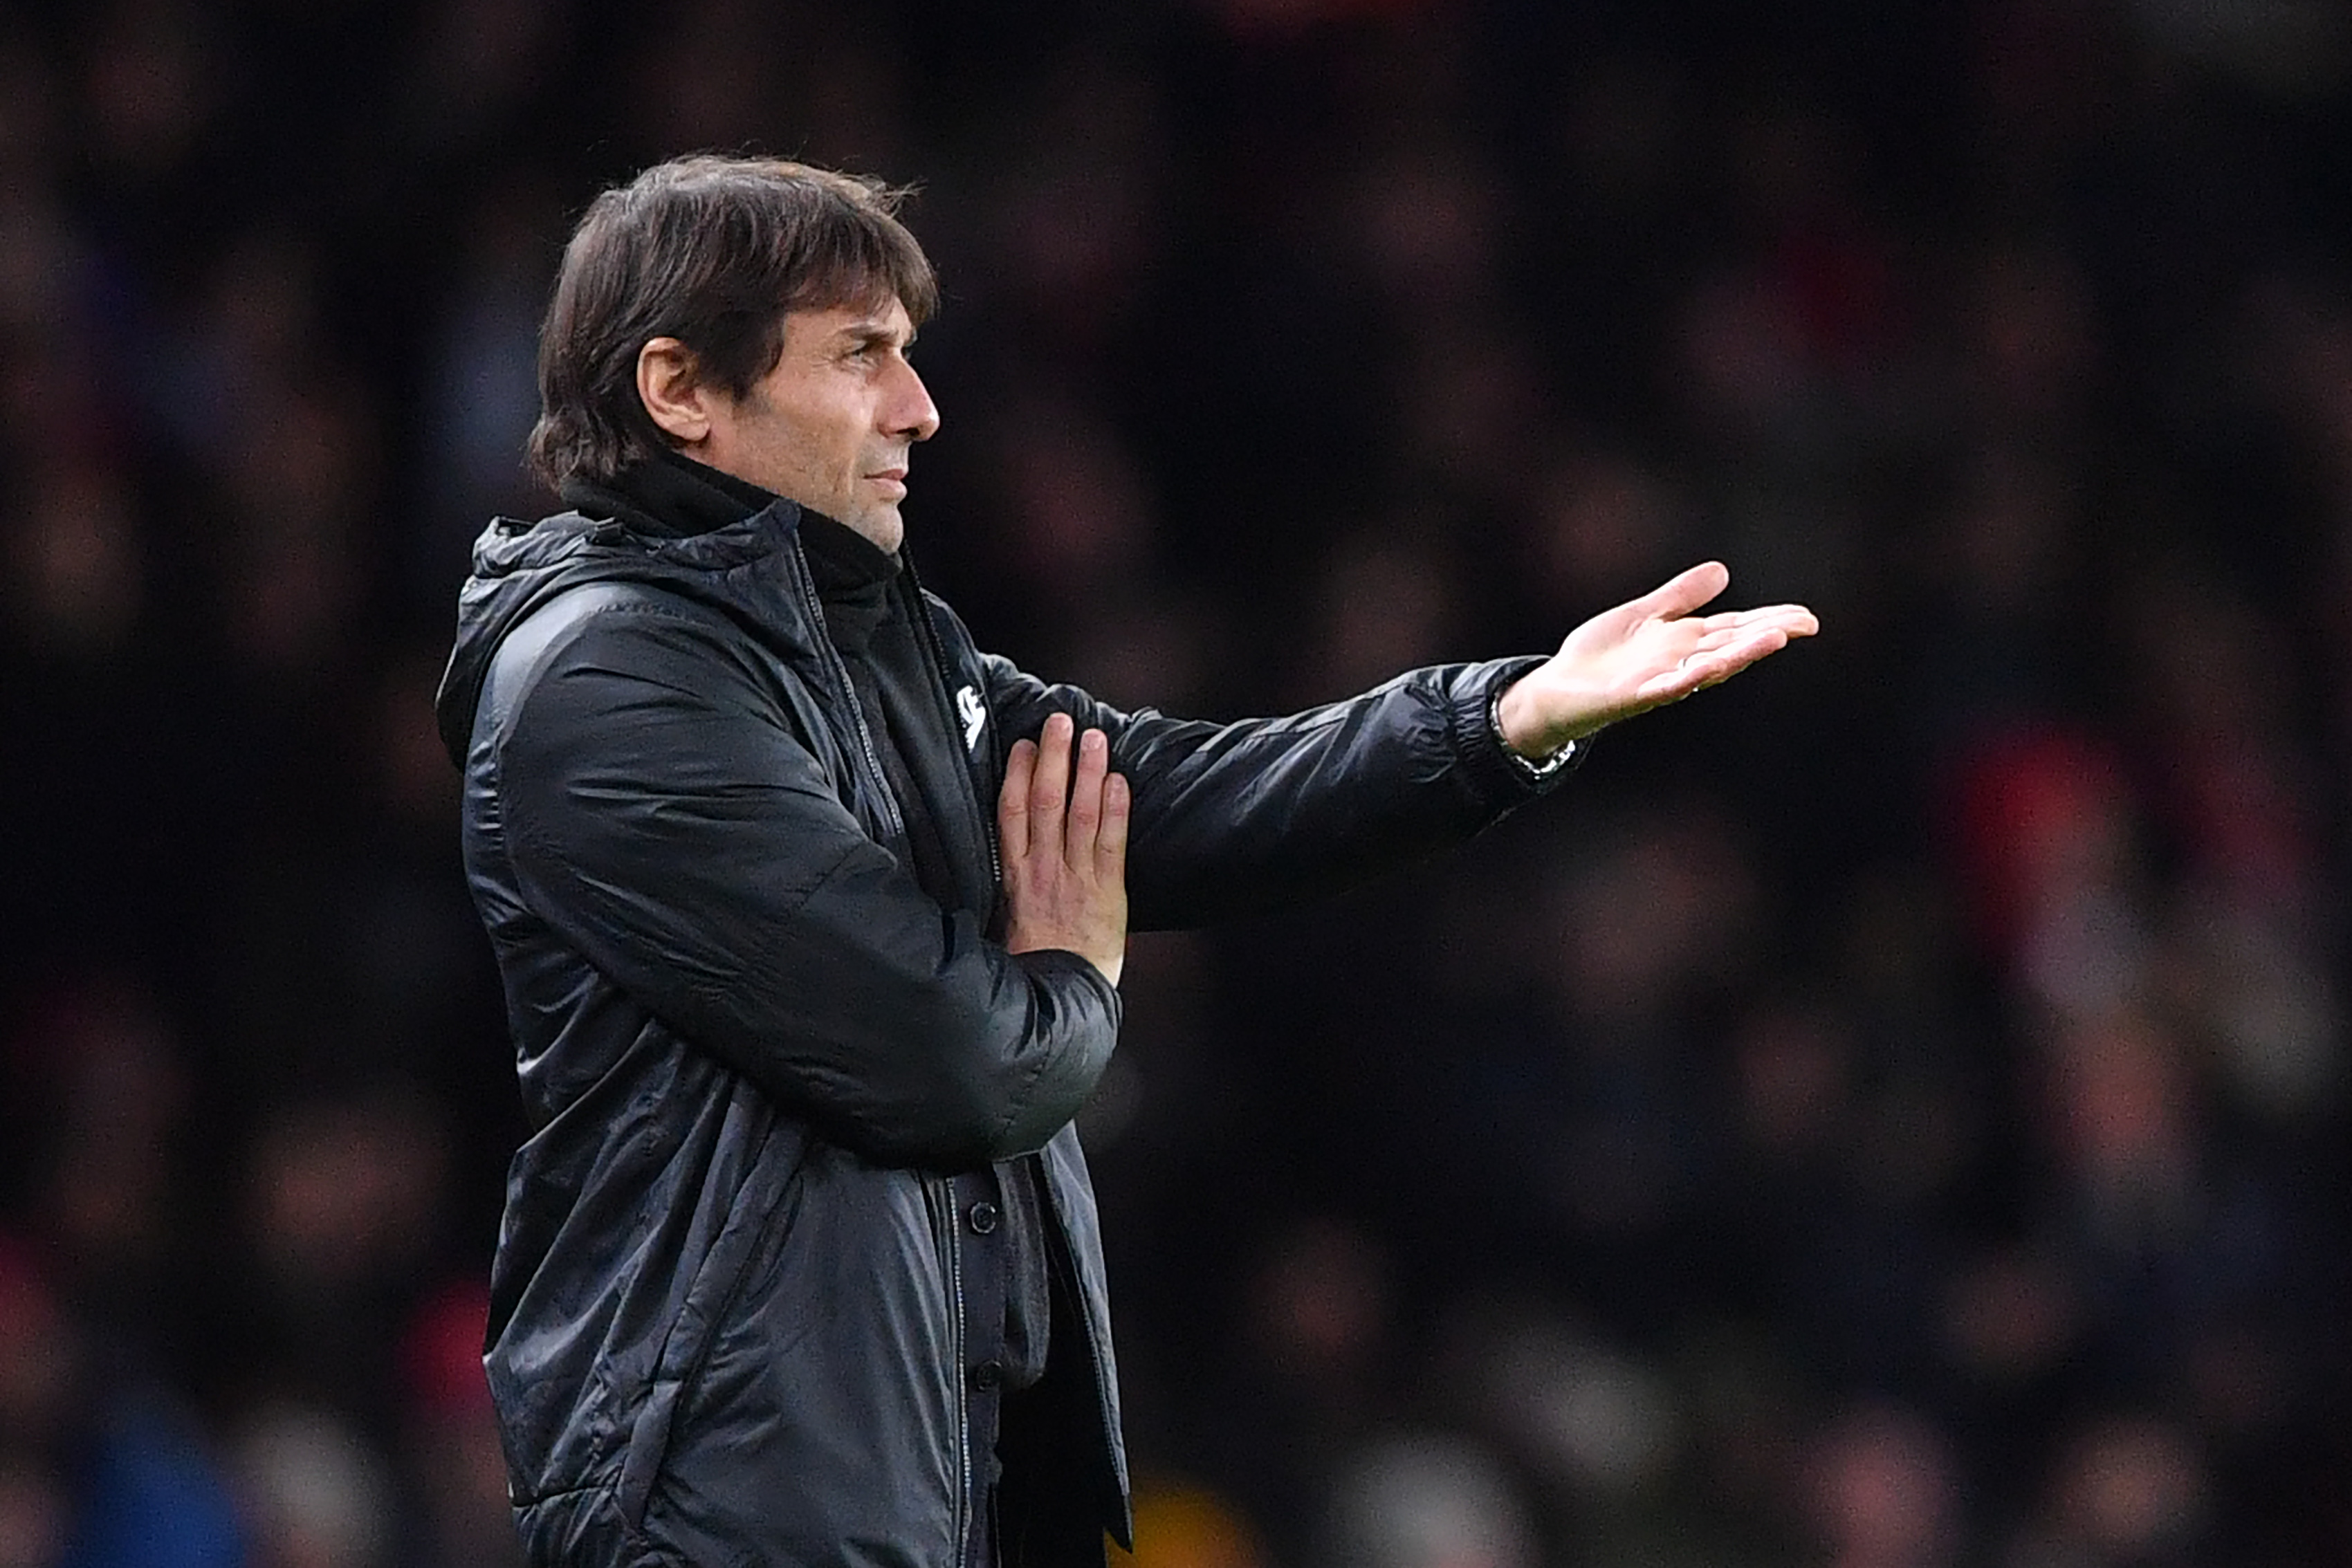 Chelsea's Italian head coach Antonio Conte gestures during the League Cup semi-final football match between Arsenal and Chelsea at the Emirates Stadium in London on January 24, 2018.  / AFP PHOTO / Ben STANSALL / RESTRICTED TO EDITORIAL USE. No use with unauthorized audio, video, data, fixture lists, club/league logos or 'live' services. Online in-match use limited to 75 images, no video emulation. No use in betting, games or single club/league/player publications.  /         (Photo credit should read BEN STANSALL/AFP/Getty Images)